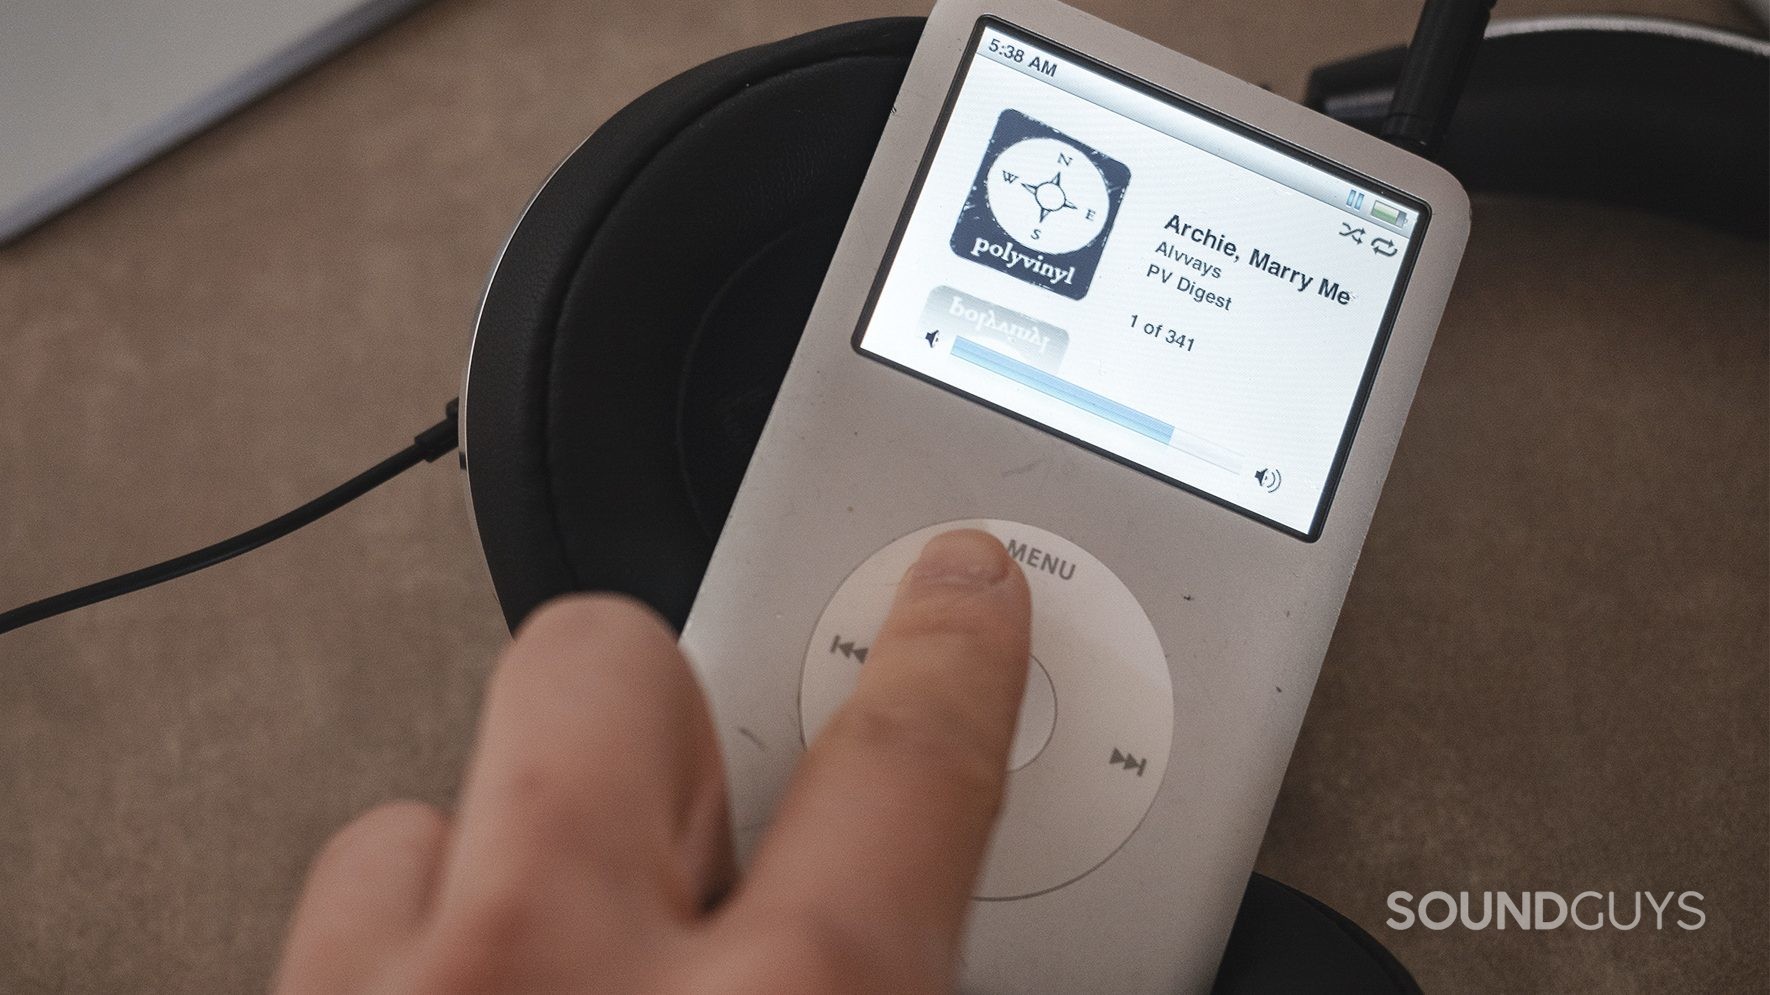  A finger turning up the volume on an iPod Classic (silver).